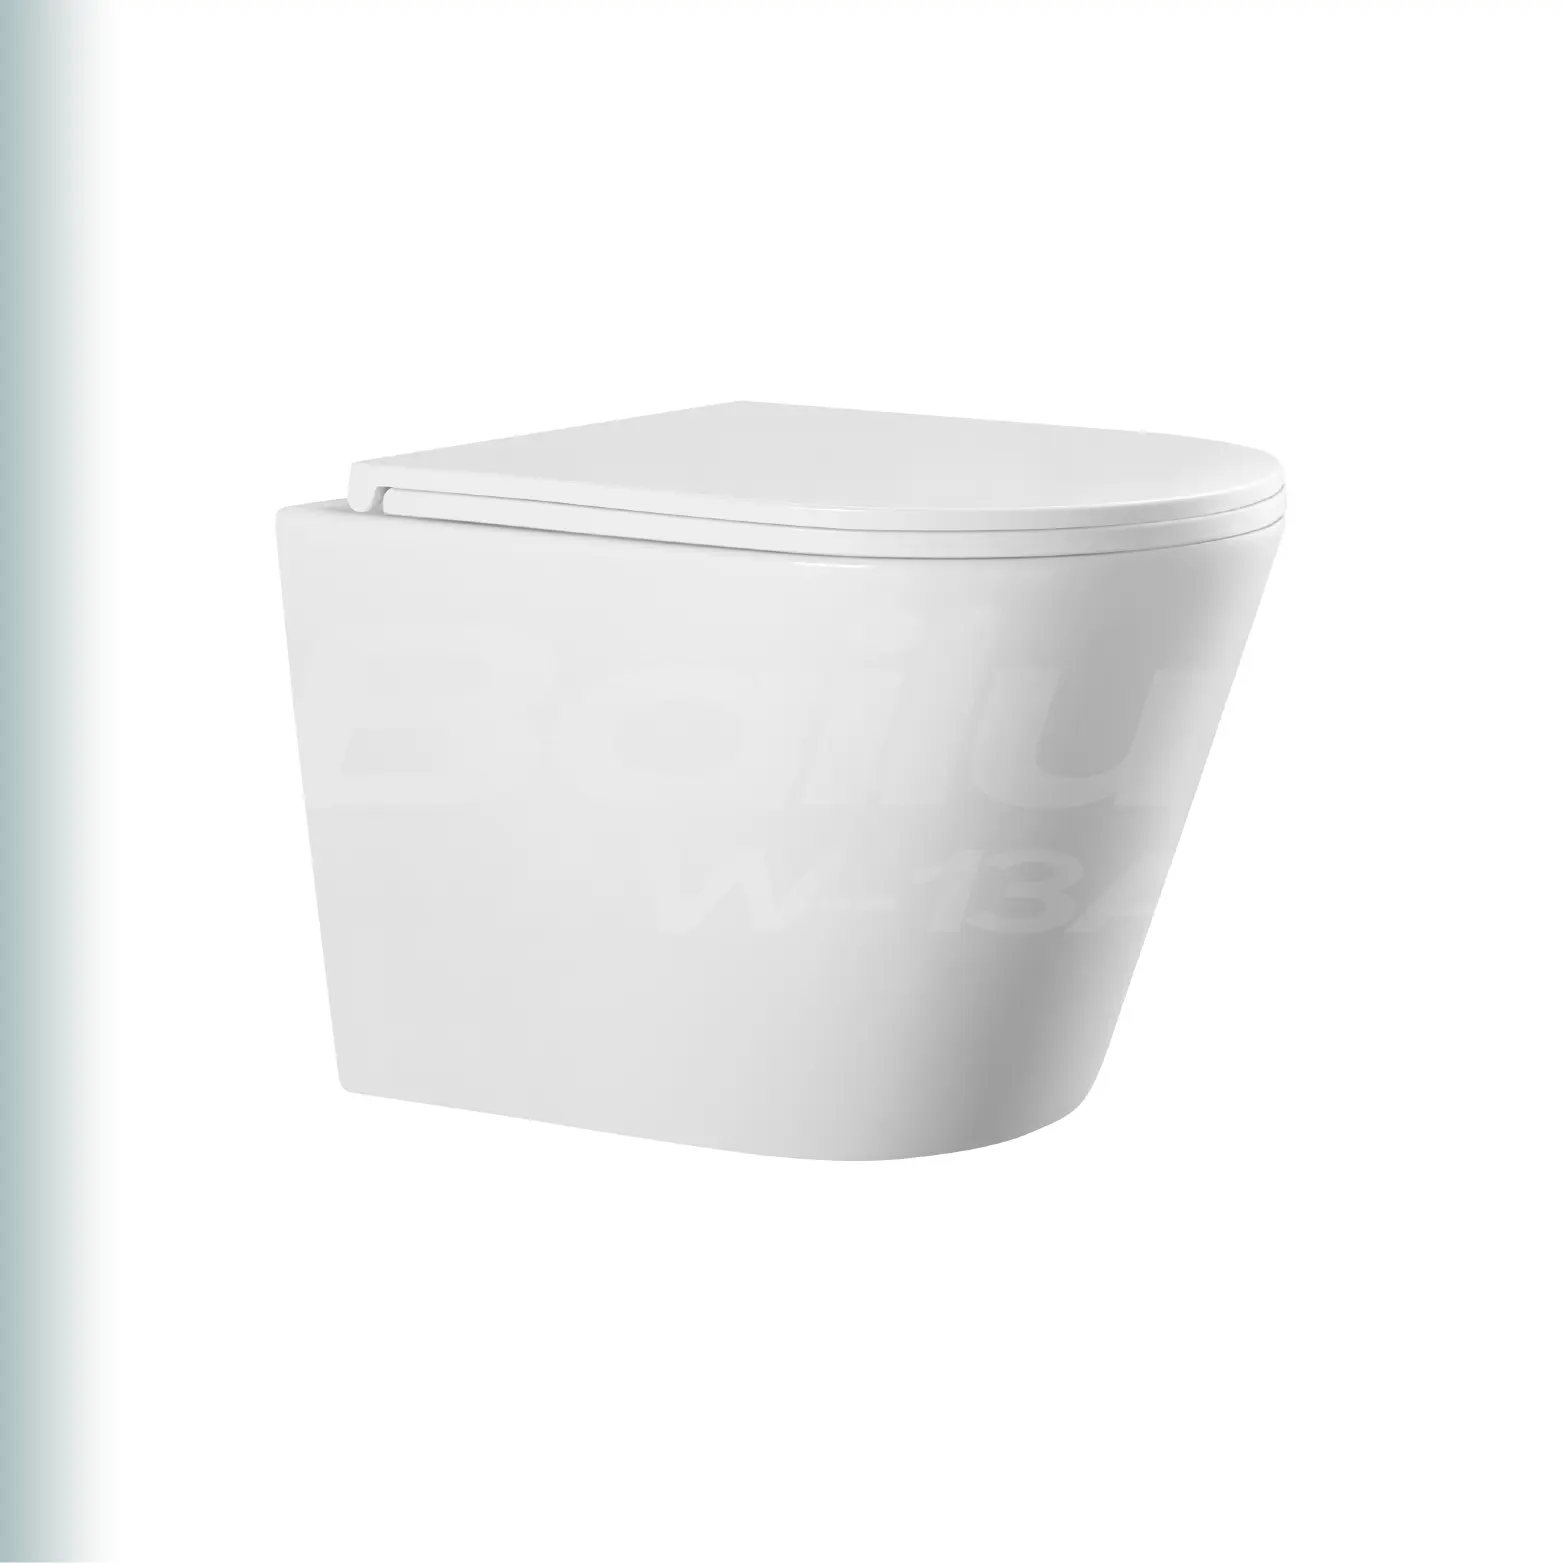 BAILU W-13A Rimless Excellent Performance Glazed Trap P-trap Wall-hung Toilet Minimal Water Usage Colors Wall Mounted Toilet